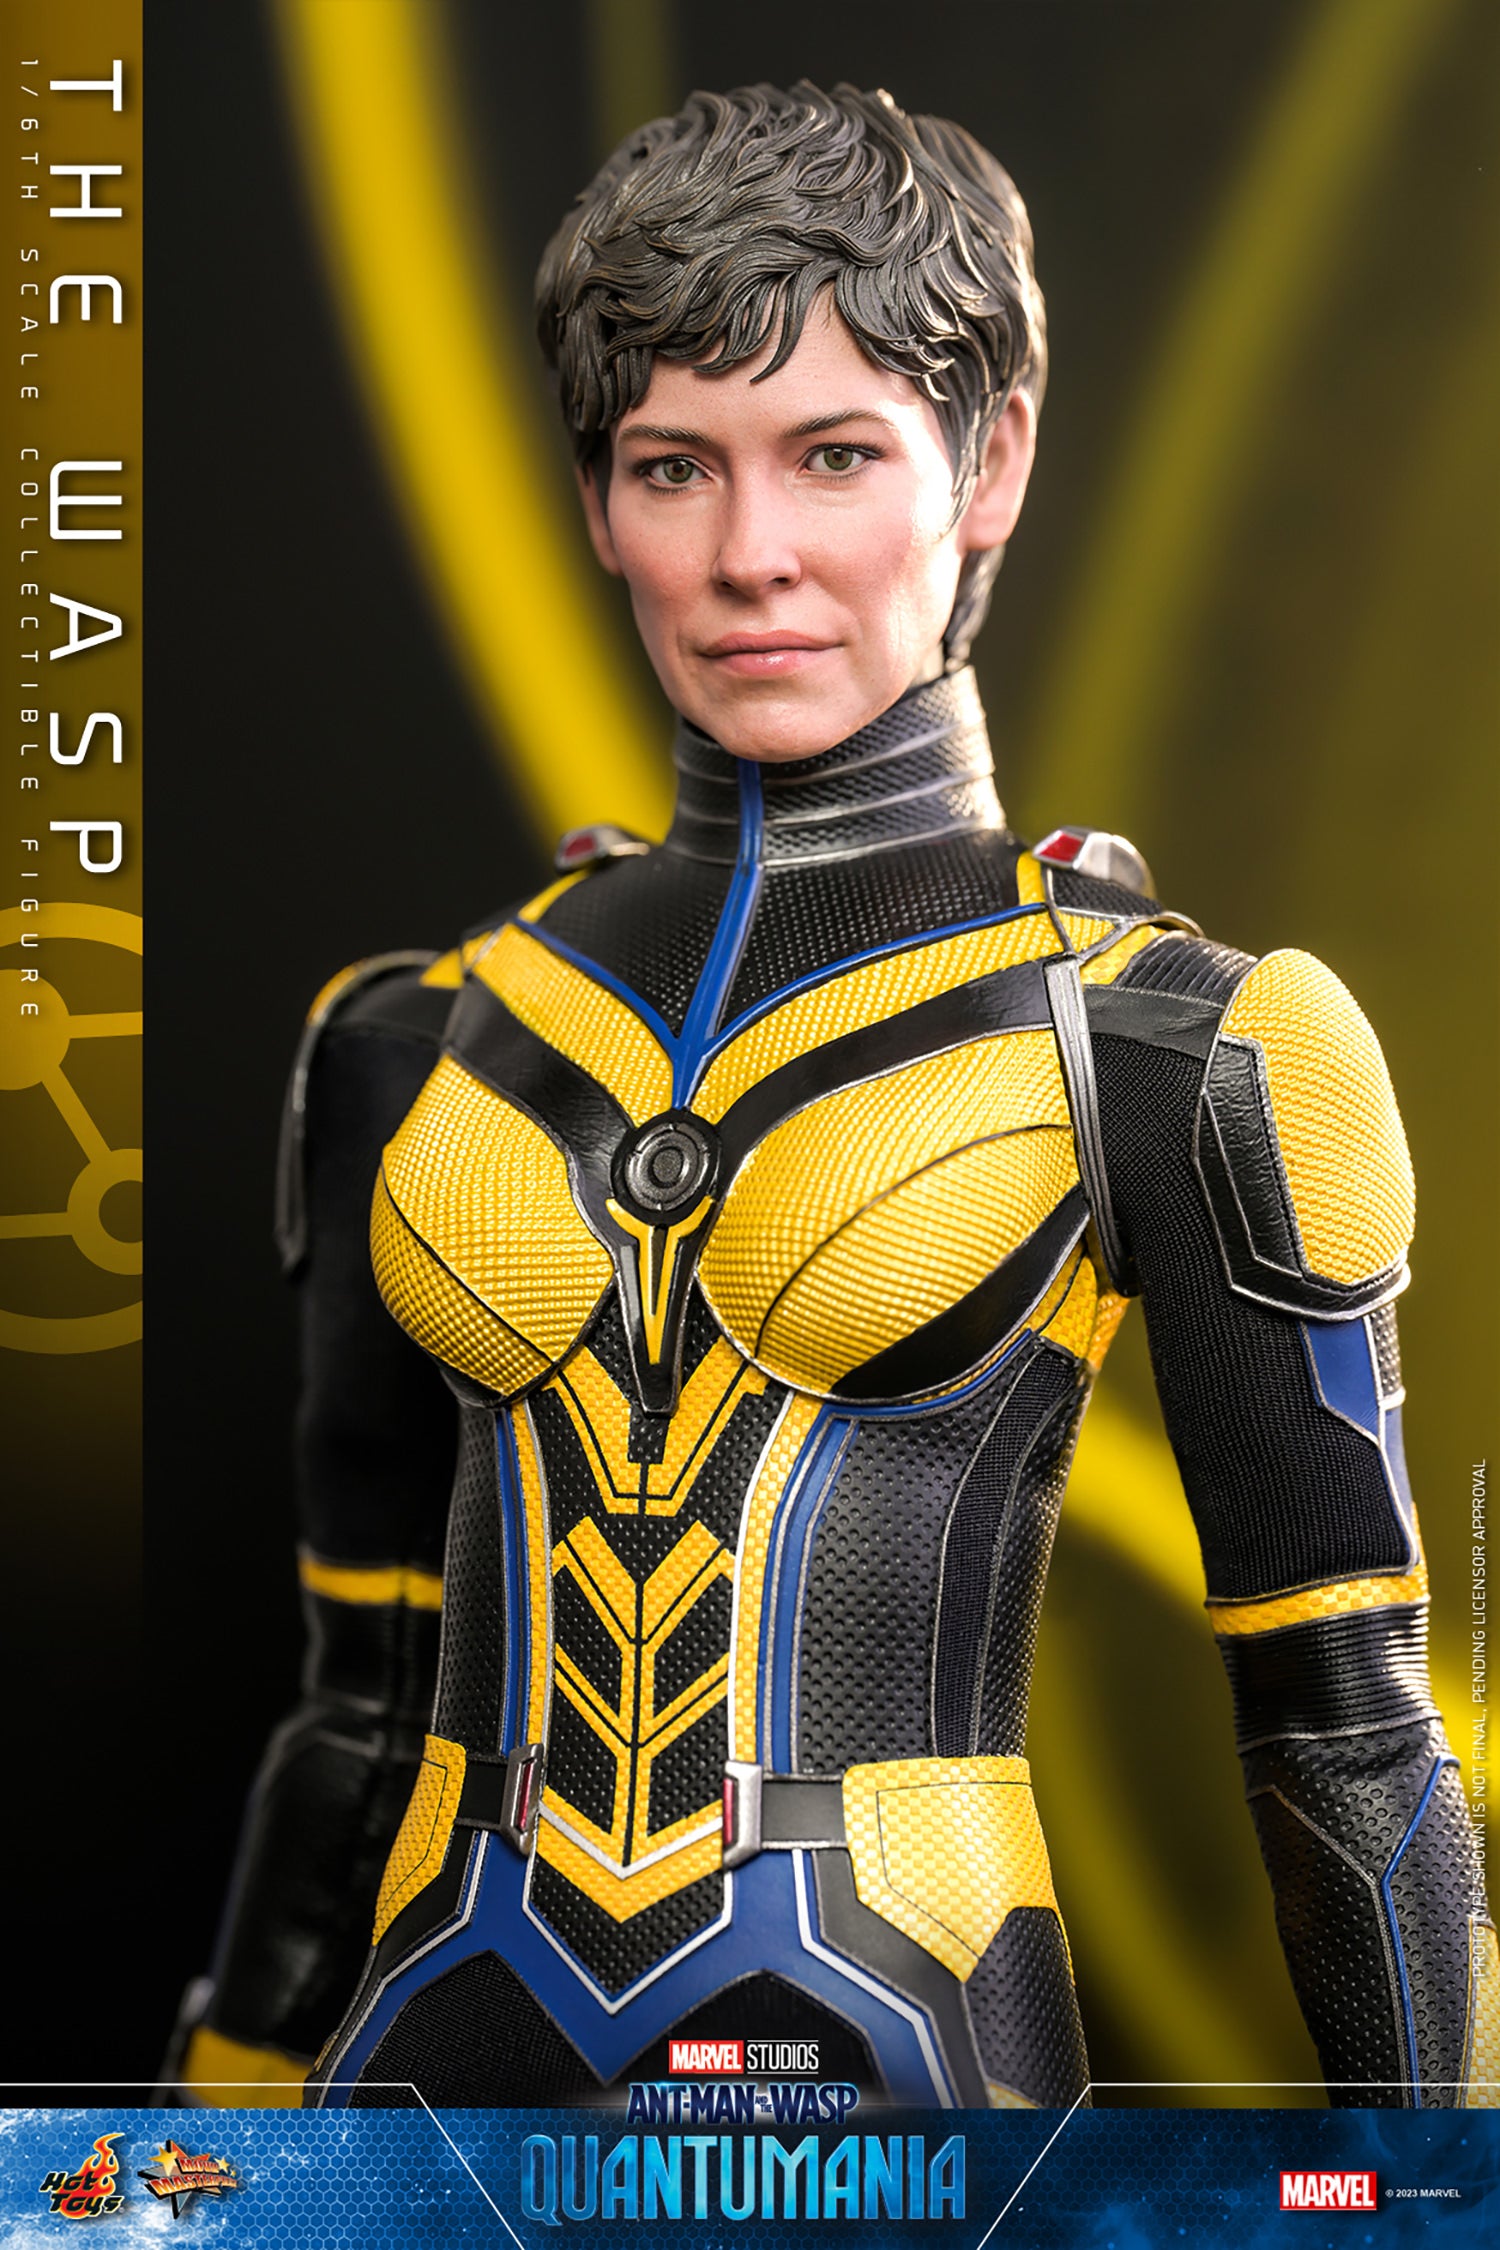 Hot Toys The Wasp *Pre-Order - OTRCollectibles